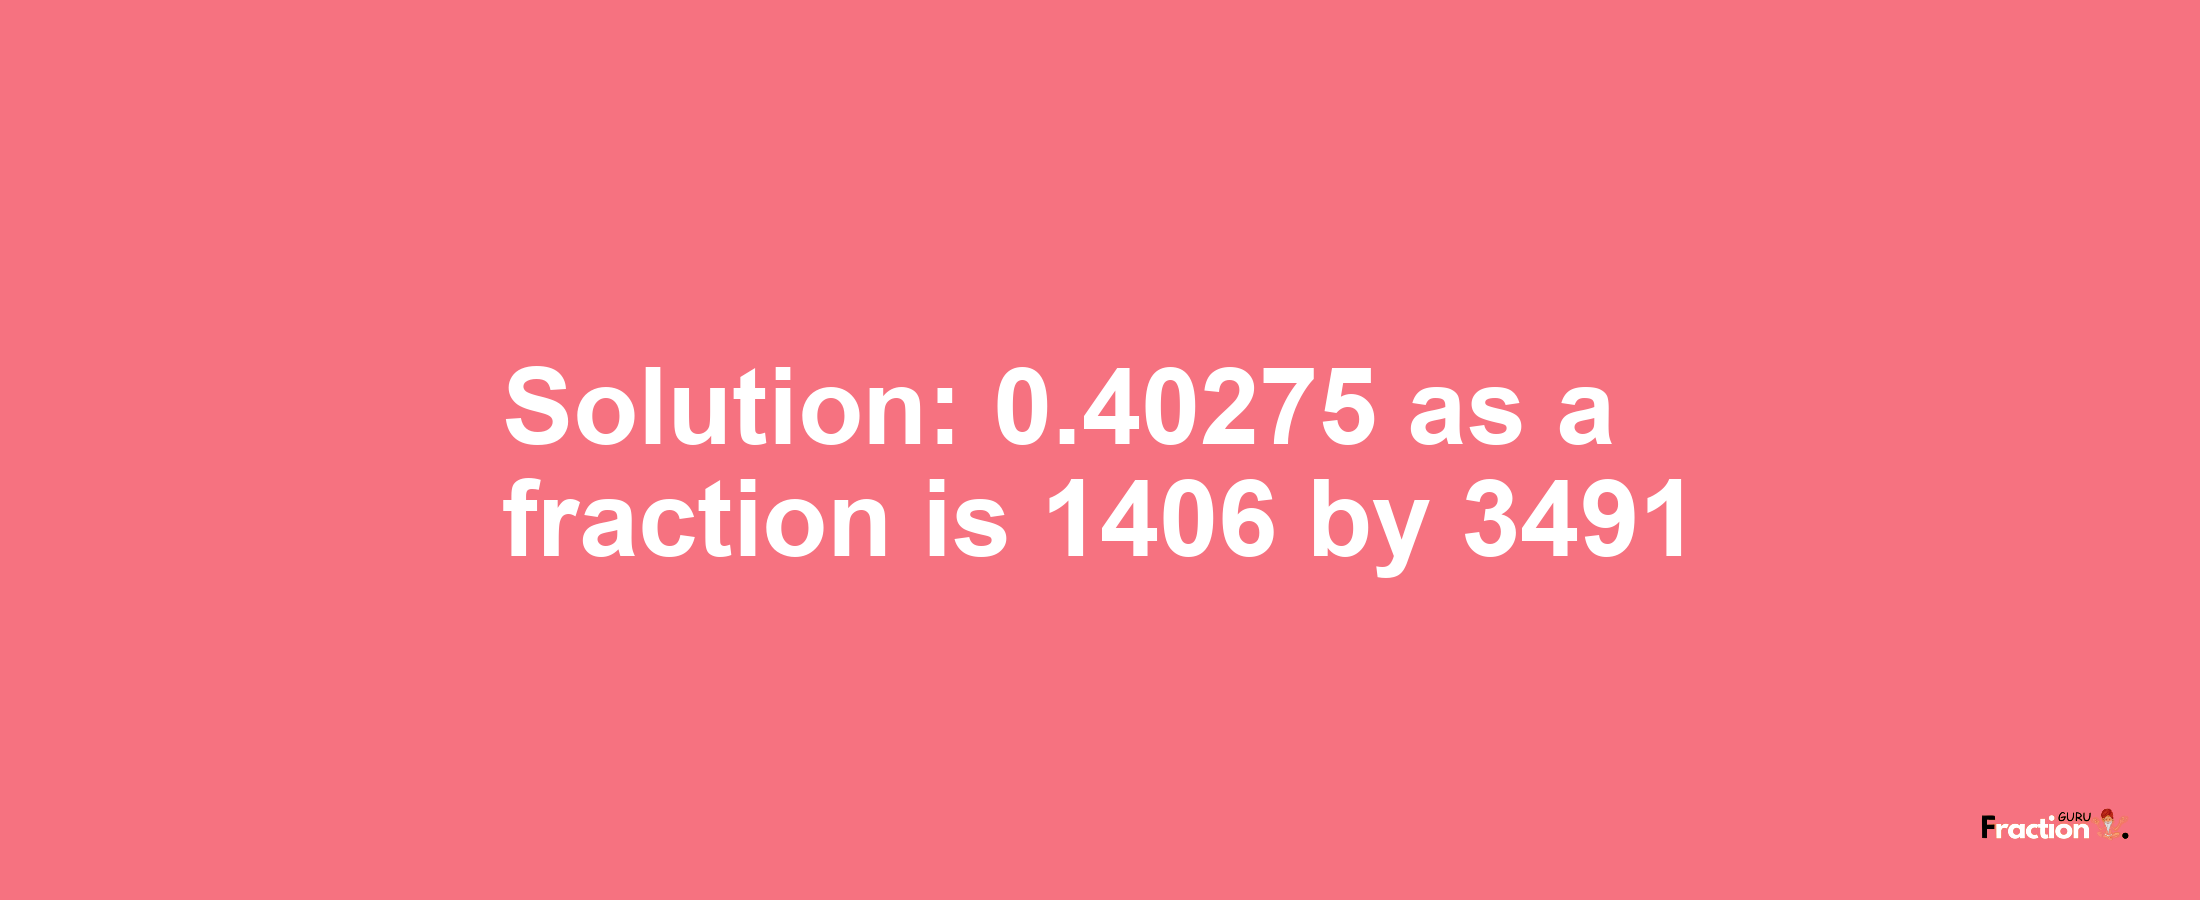 Solution:0.40275 as a fraction is 1406/3491